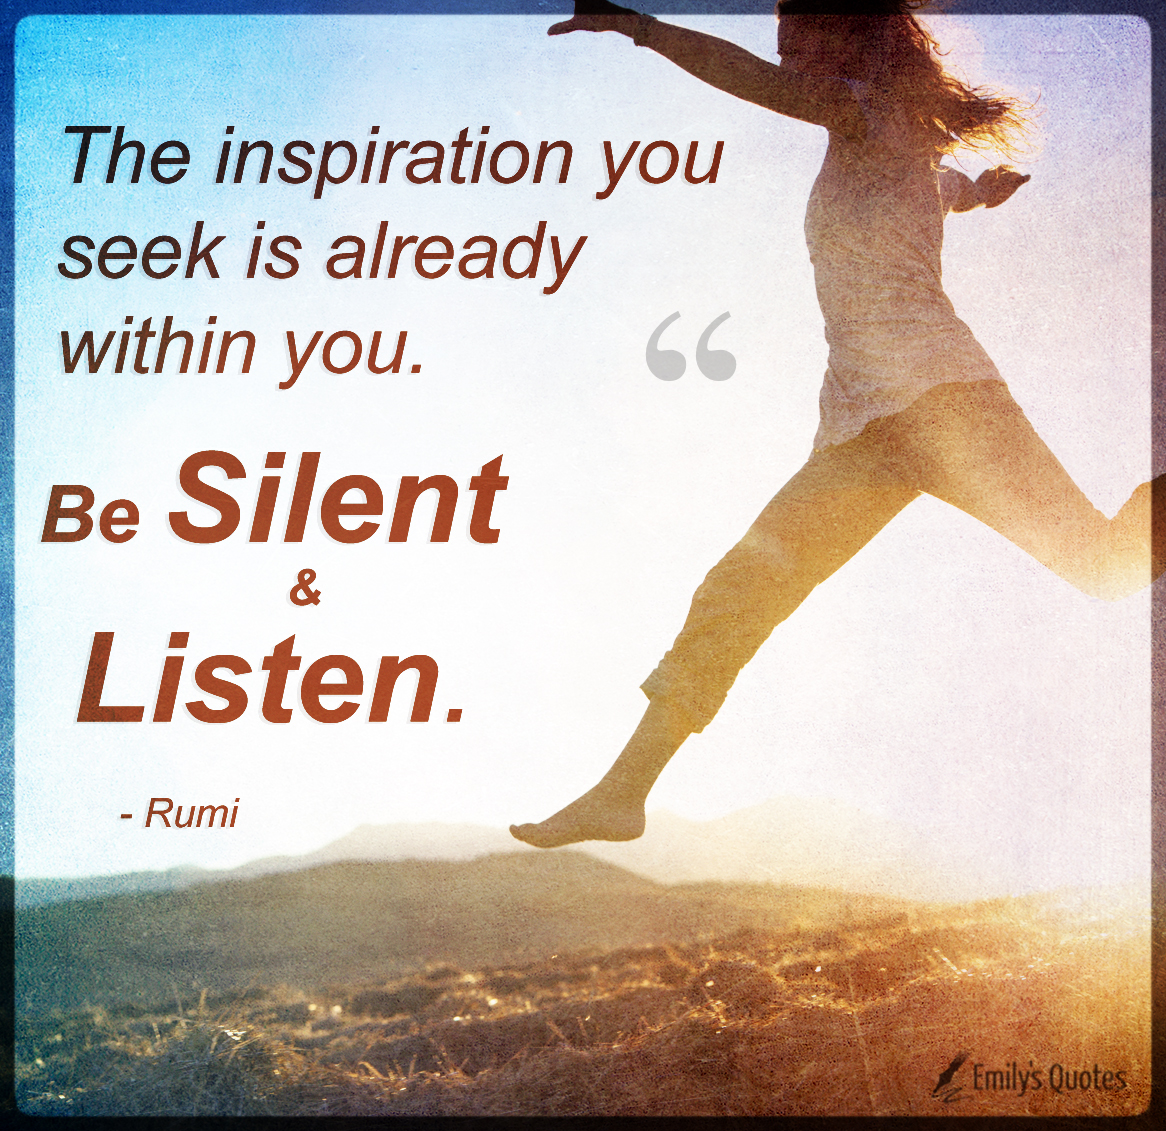 The inspiration you seek is already within you. Be silent and listen